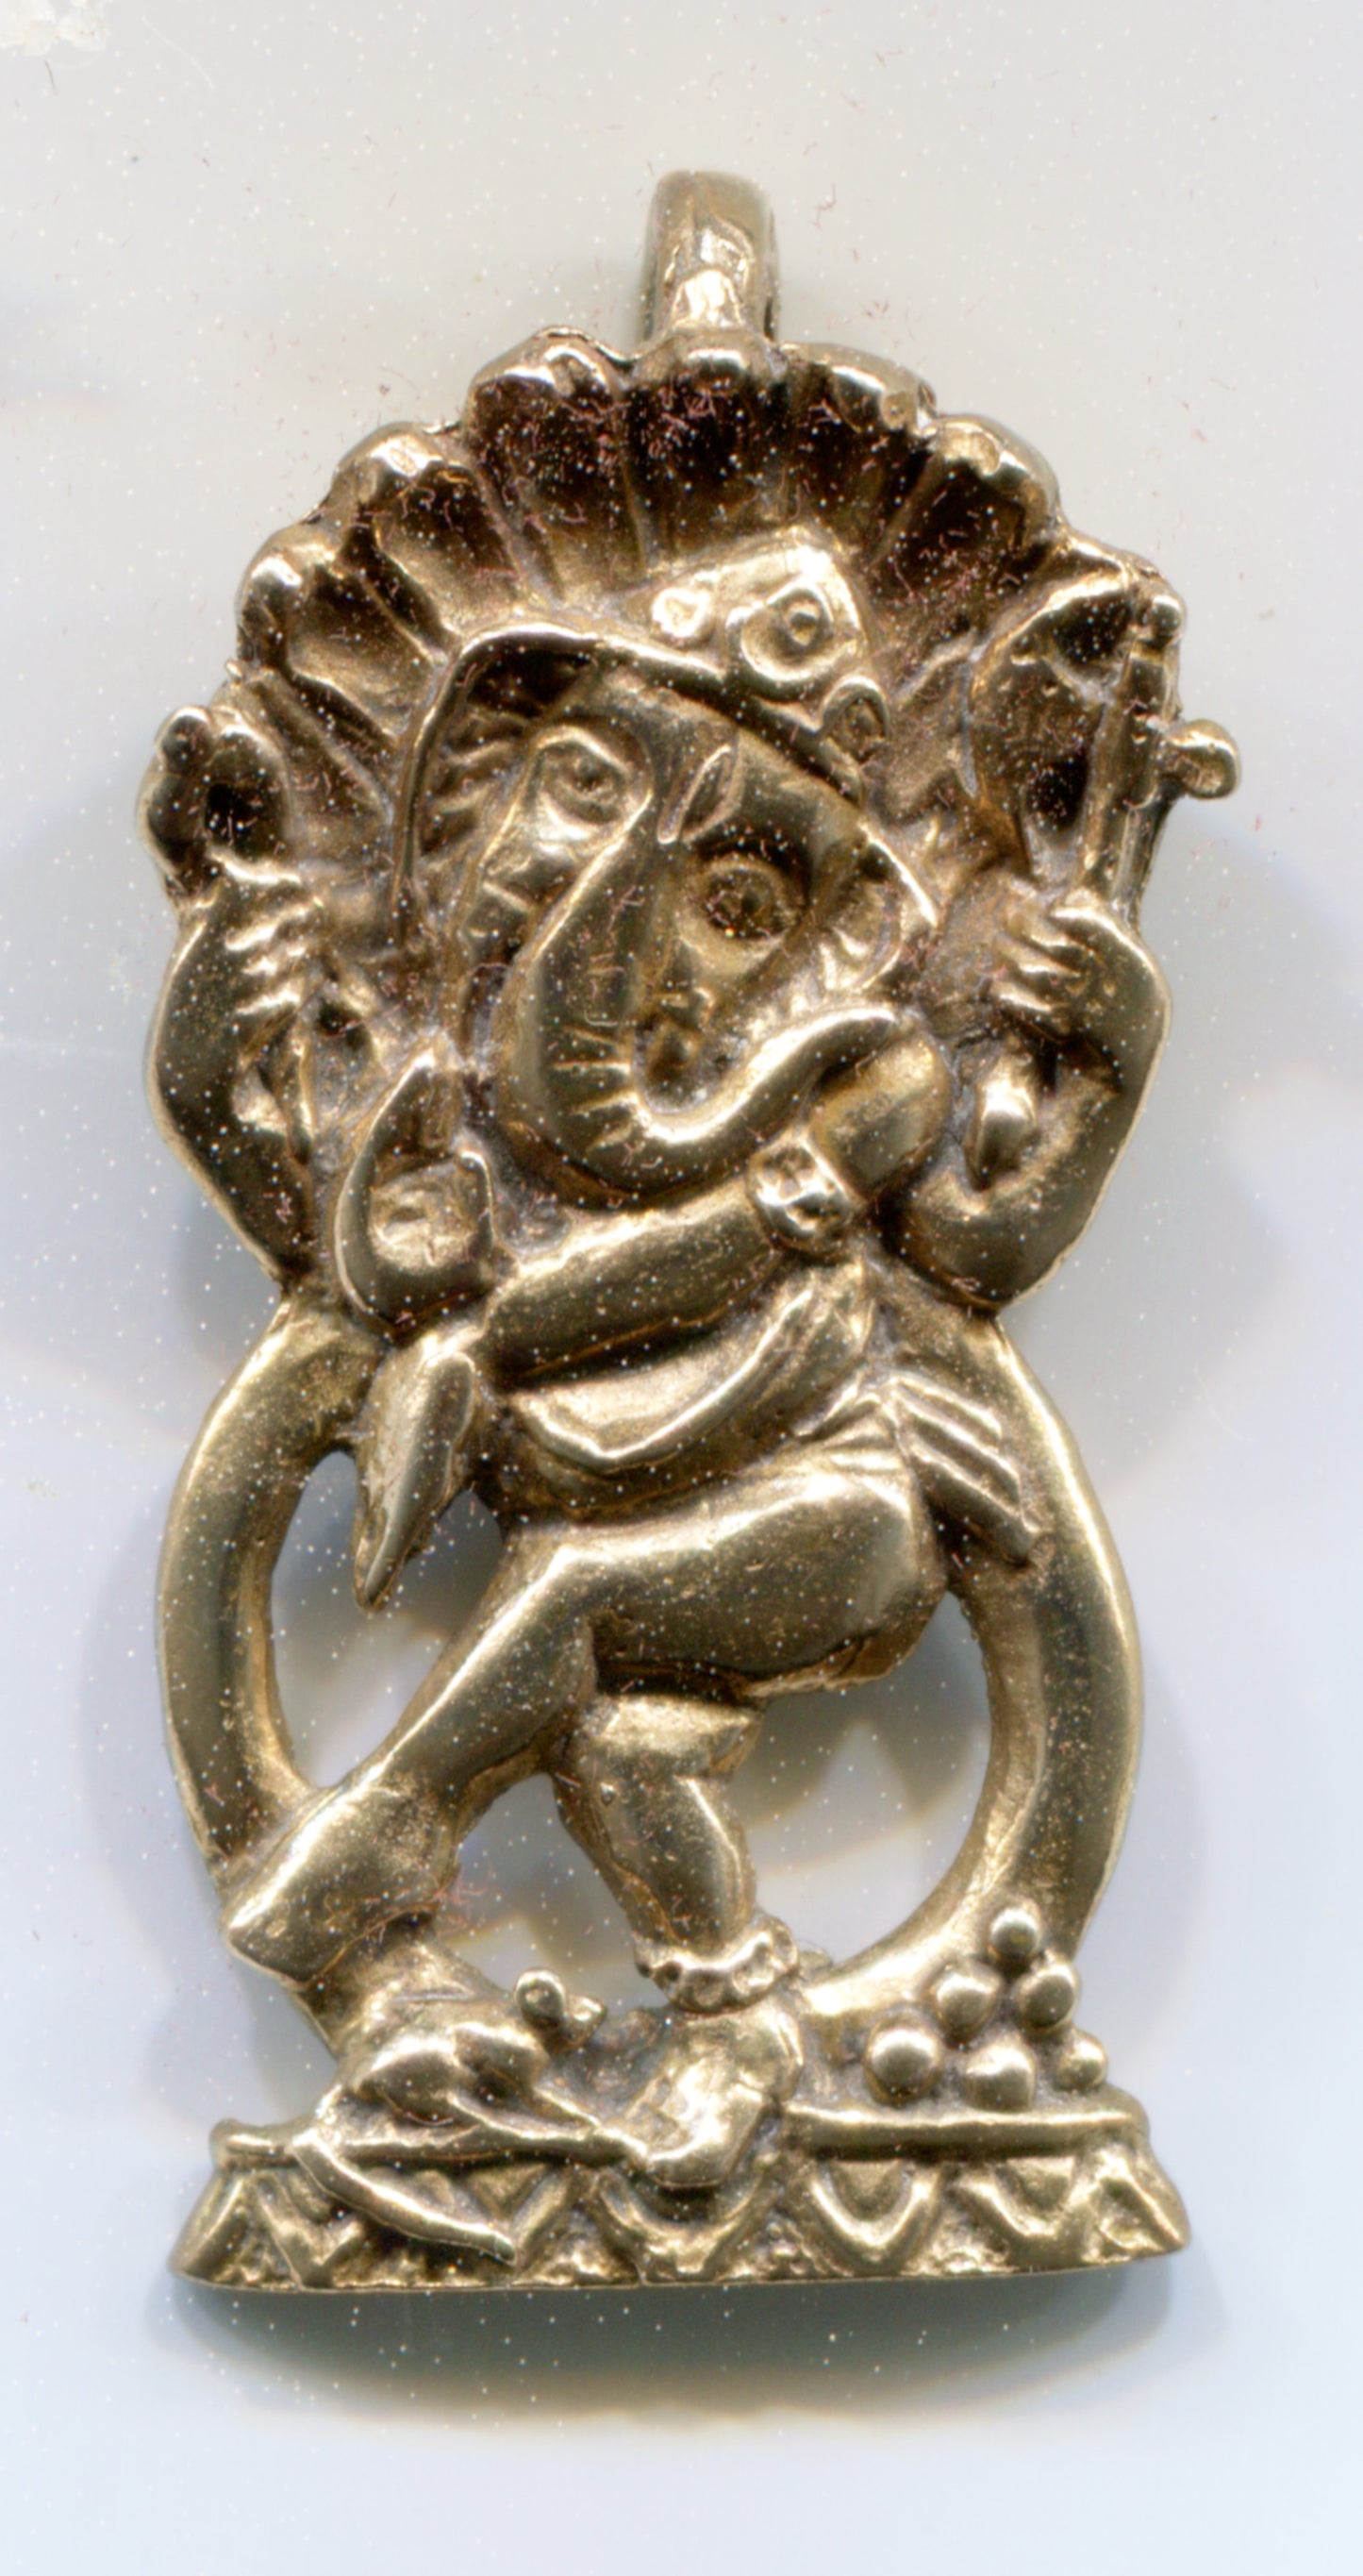 Ganesh - Remover of Obstacles - 4006B